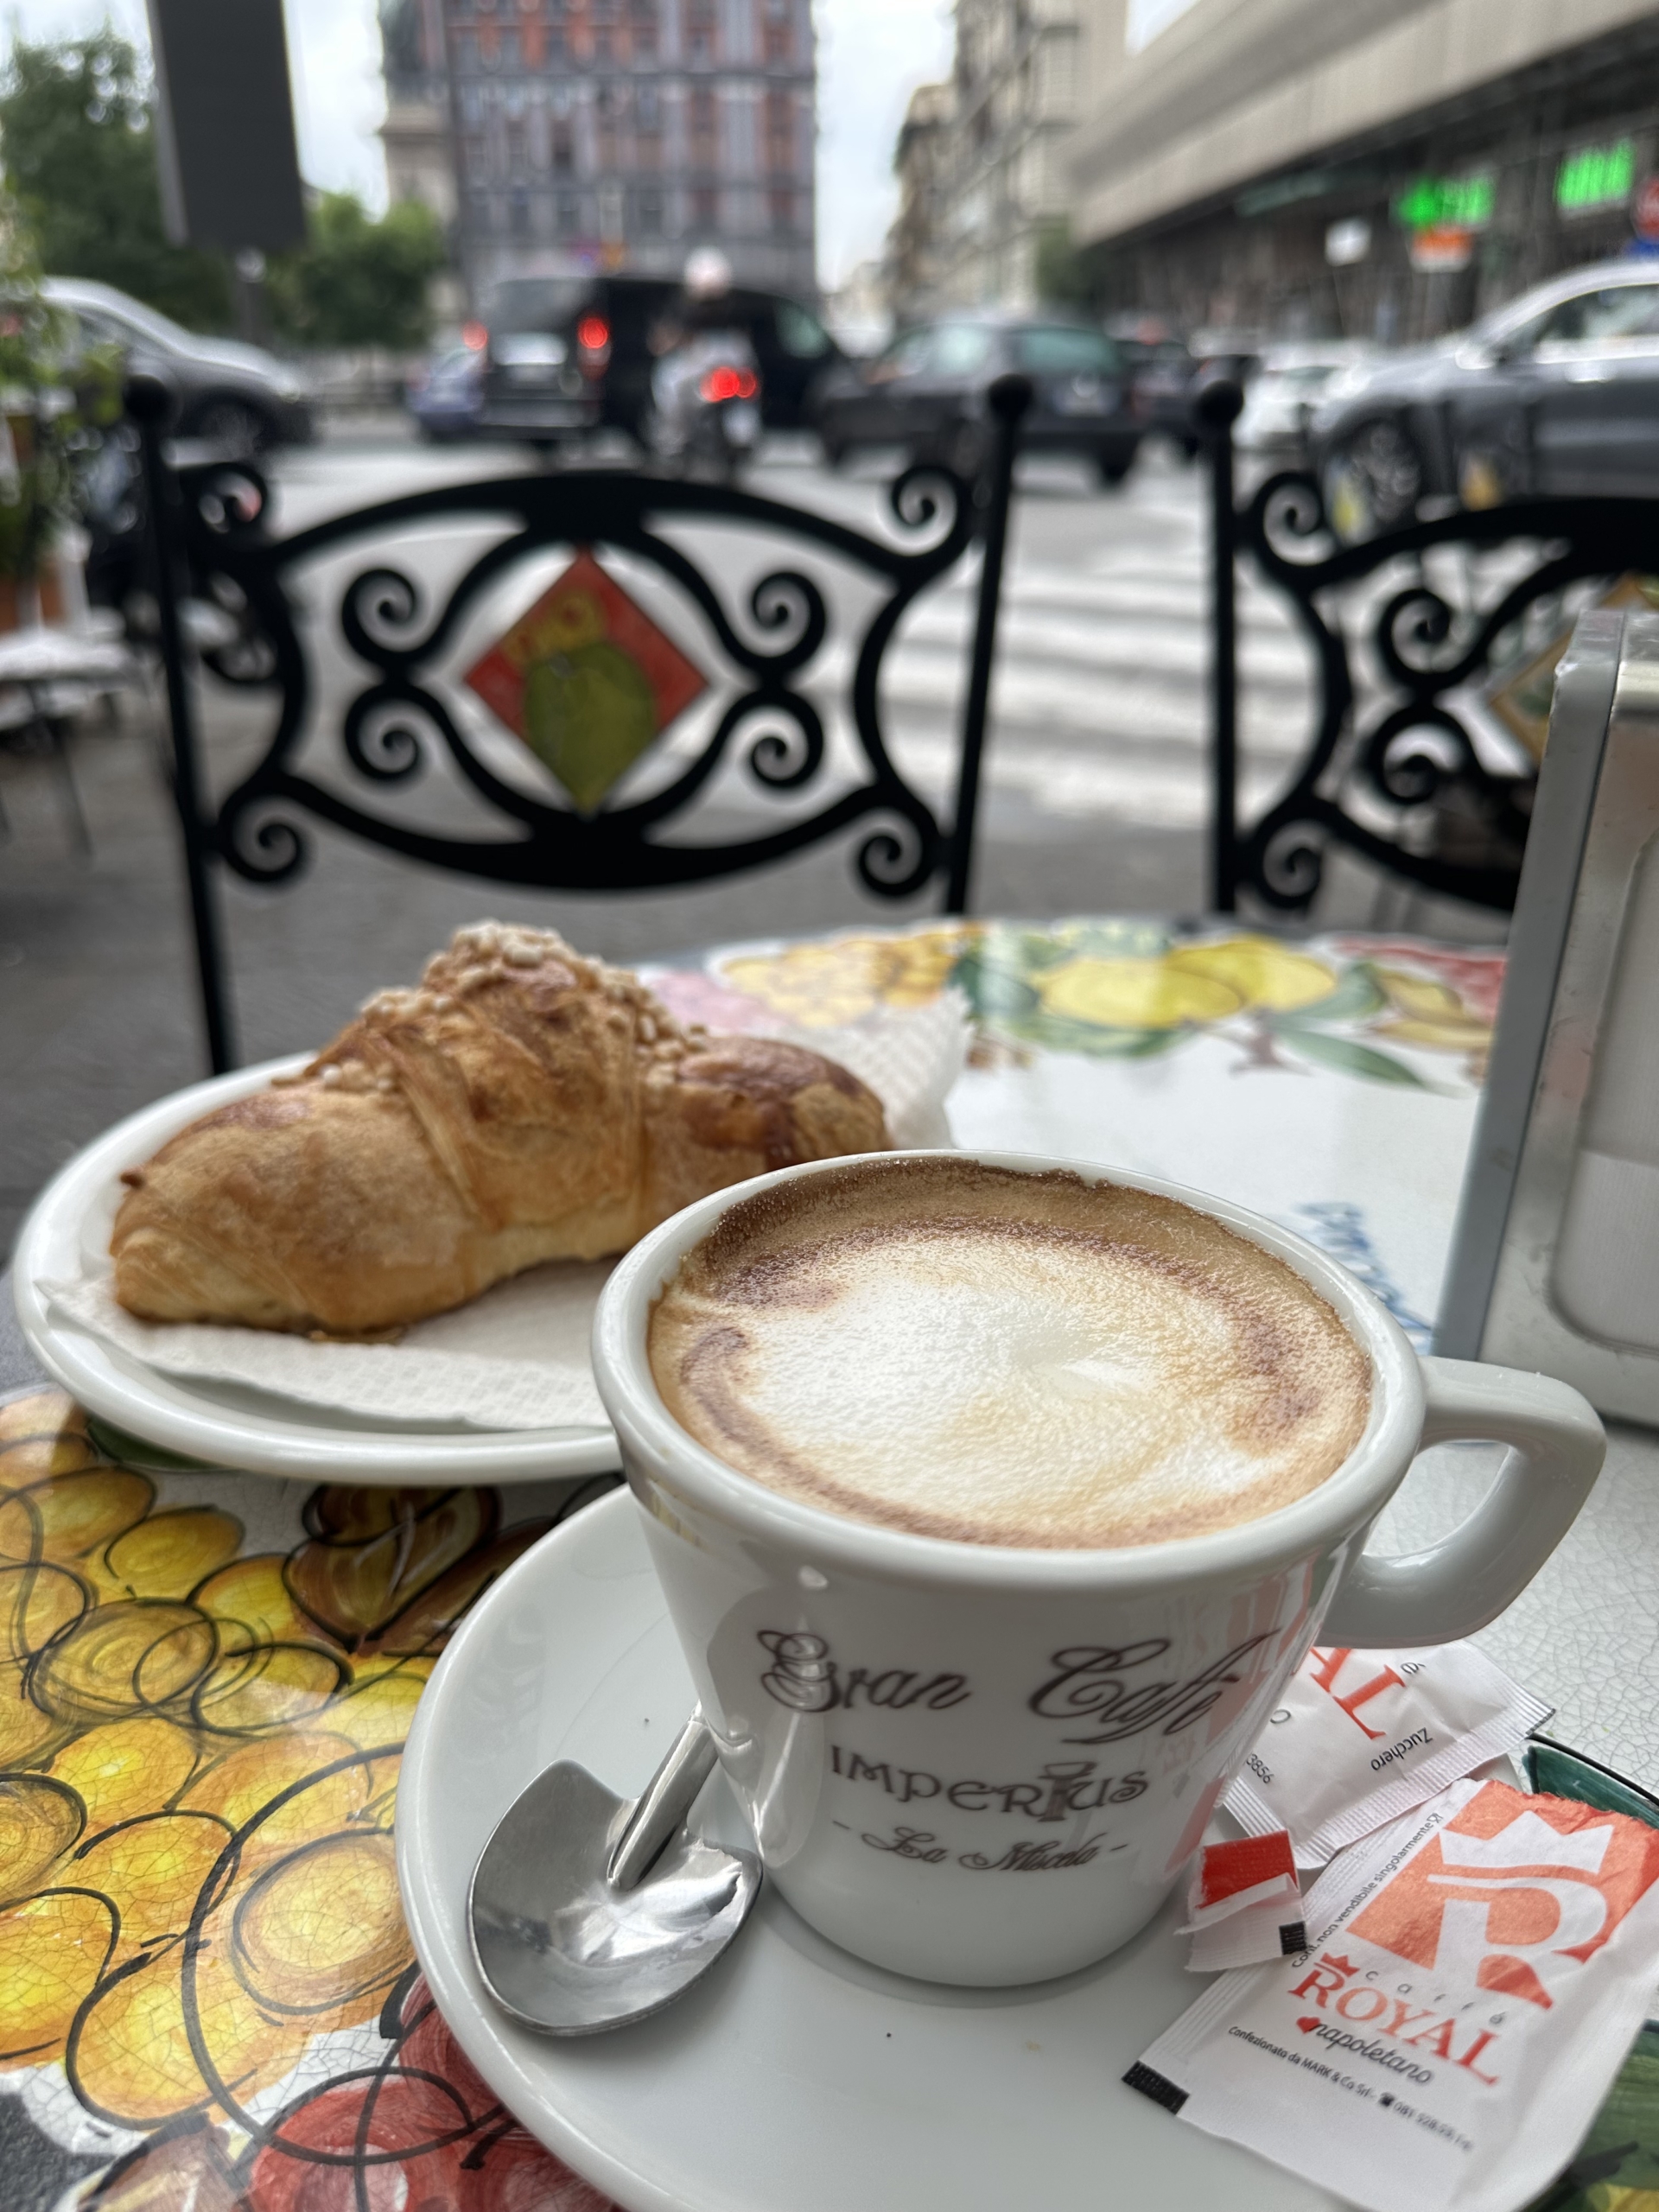 Starting the day in Naples with a cappuccino.